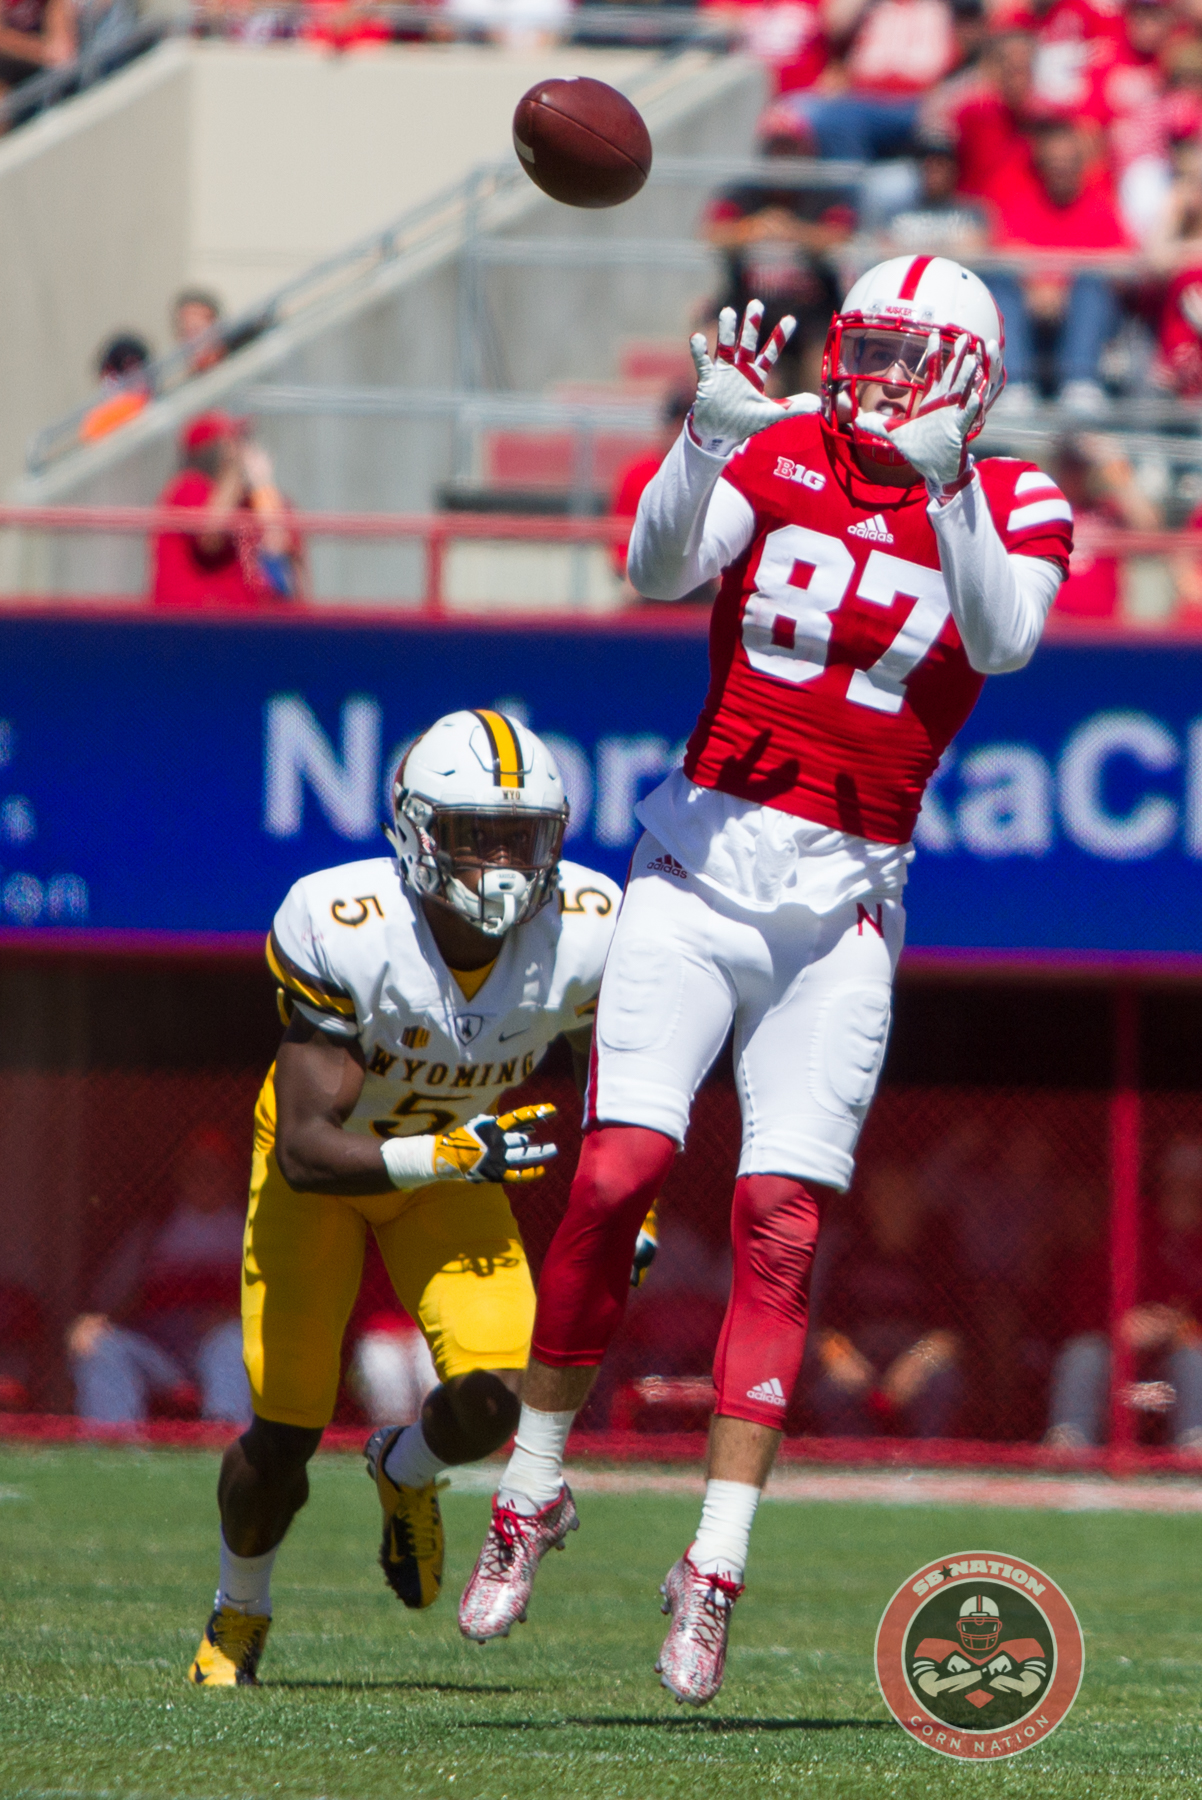 Gallery: Armstrong Sets Record, Huskers Move to 2-0